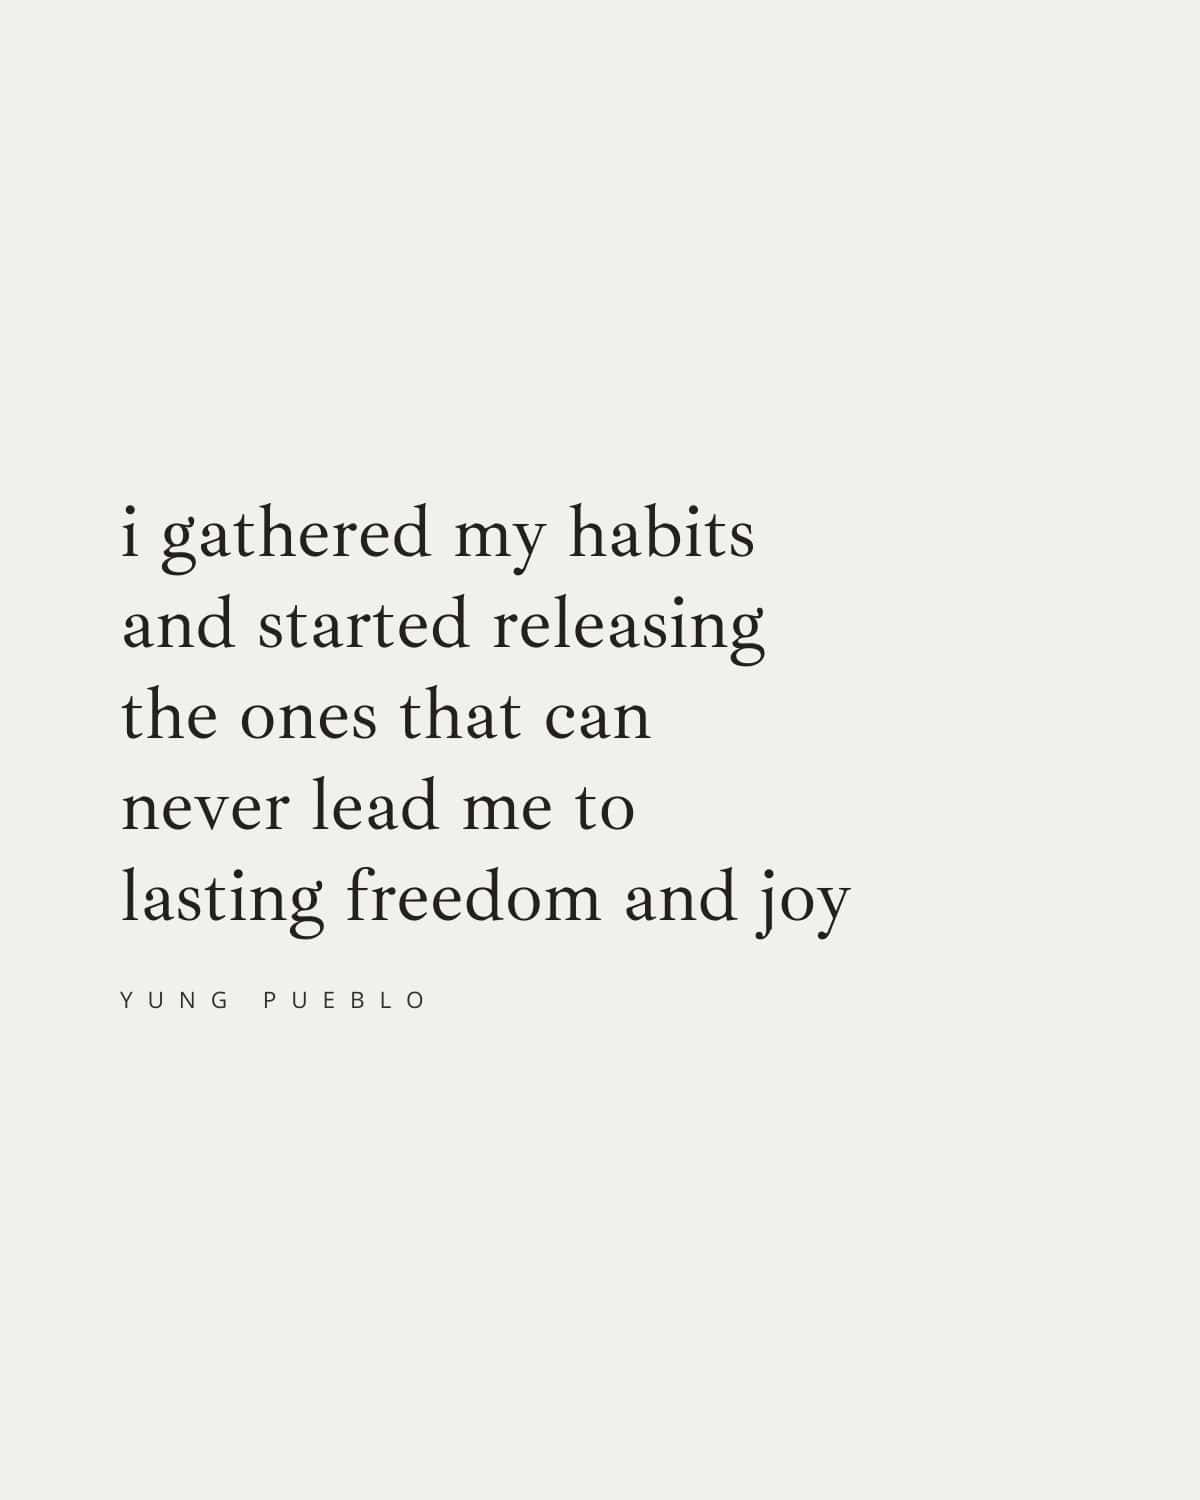 i gathered my habits 
and started releasing 
the ones that can 
never lead me to 
lasting freedom and joy
—yung pueblo